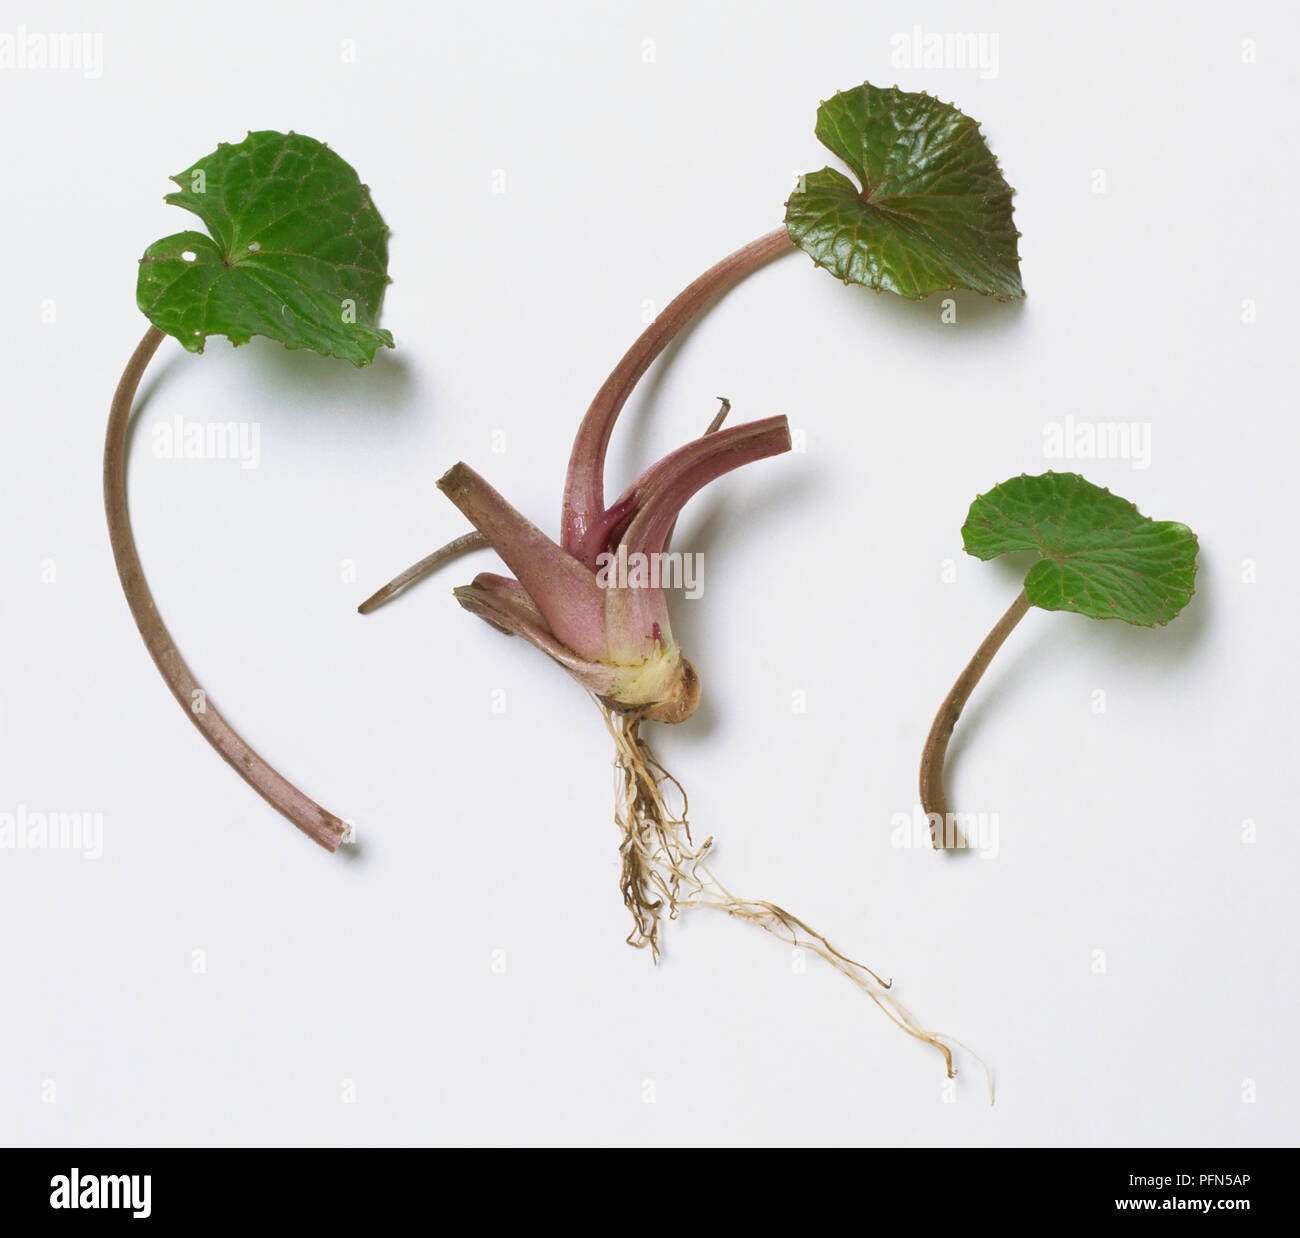 Wasabi root and leaves. Stock Photo